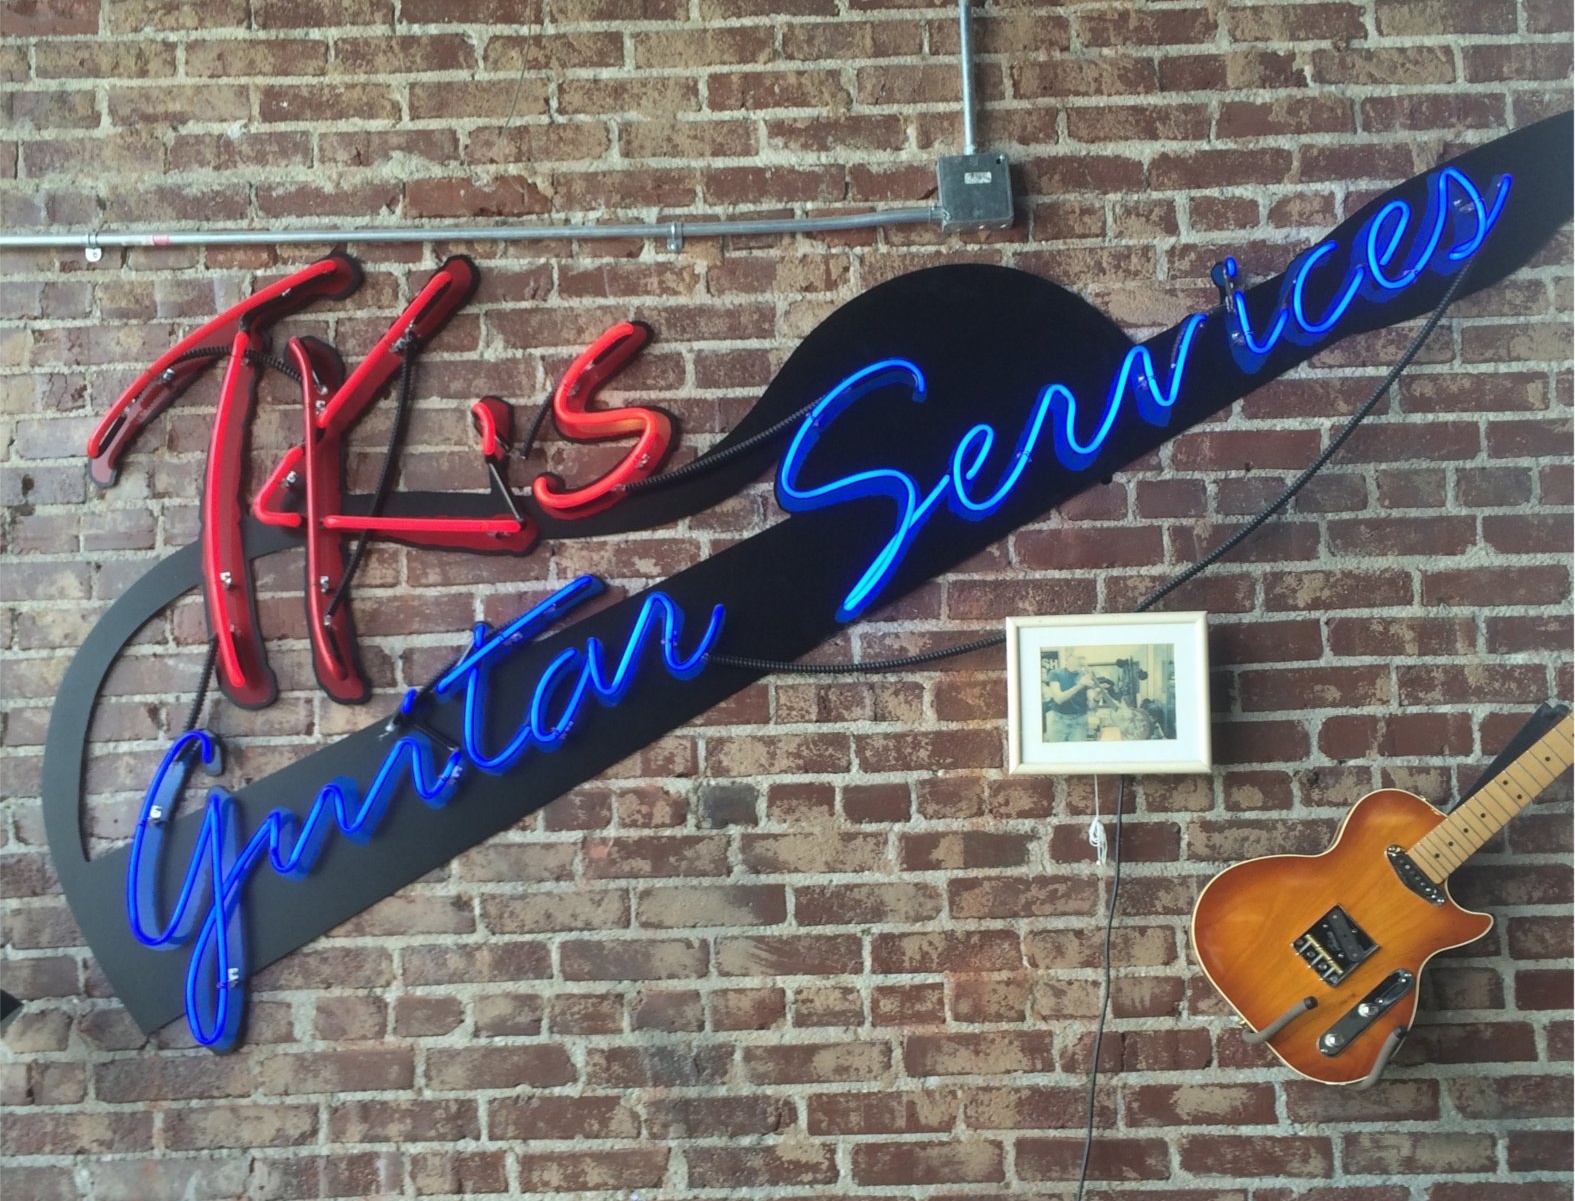 TK's Guitar Services